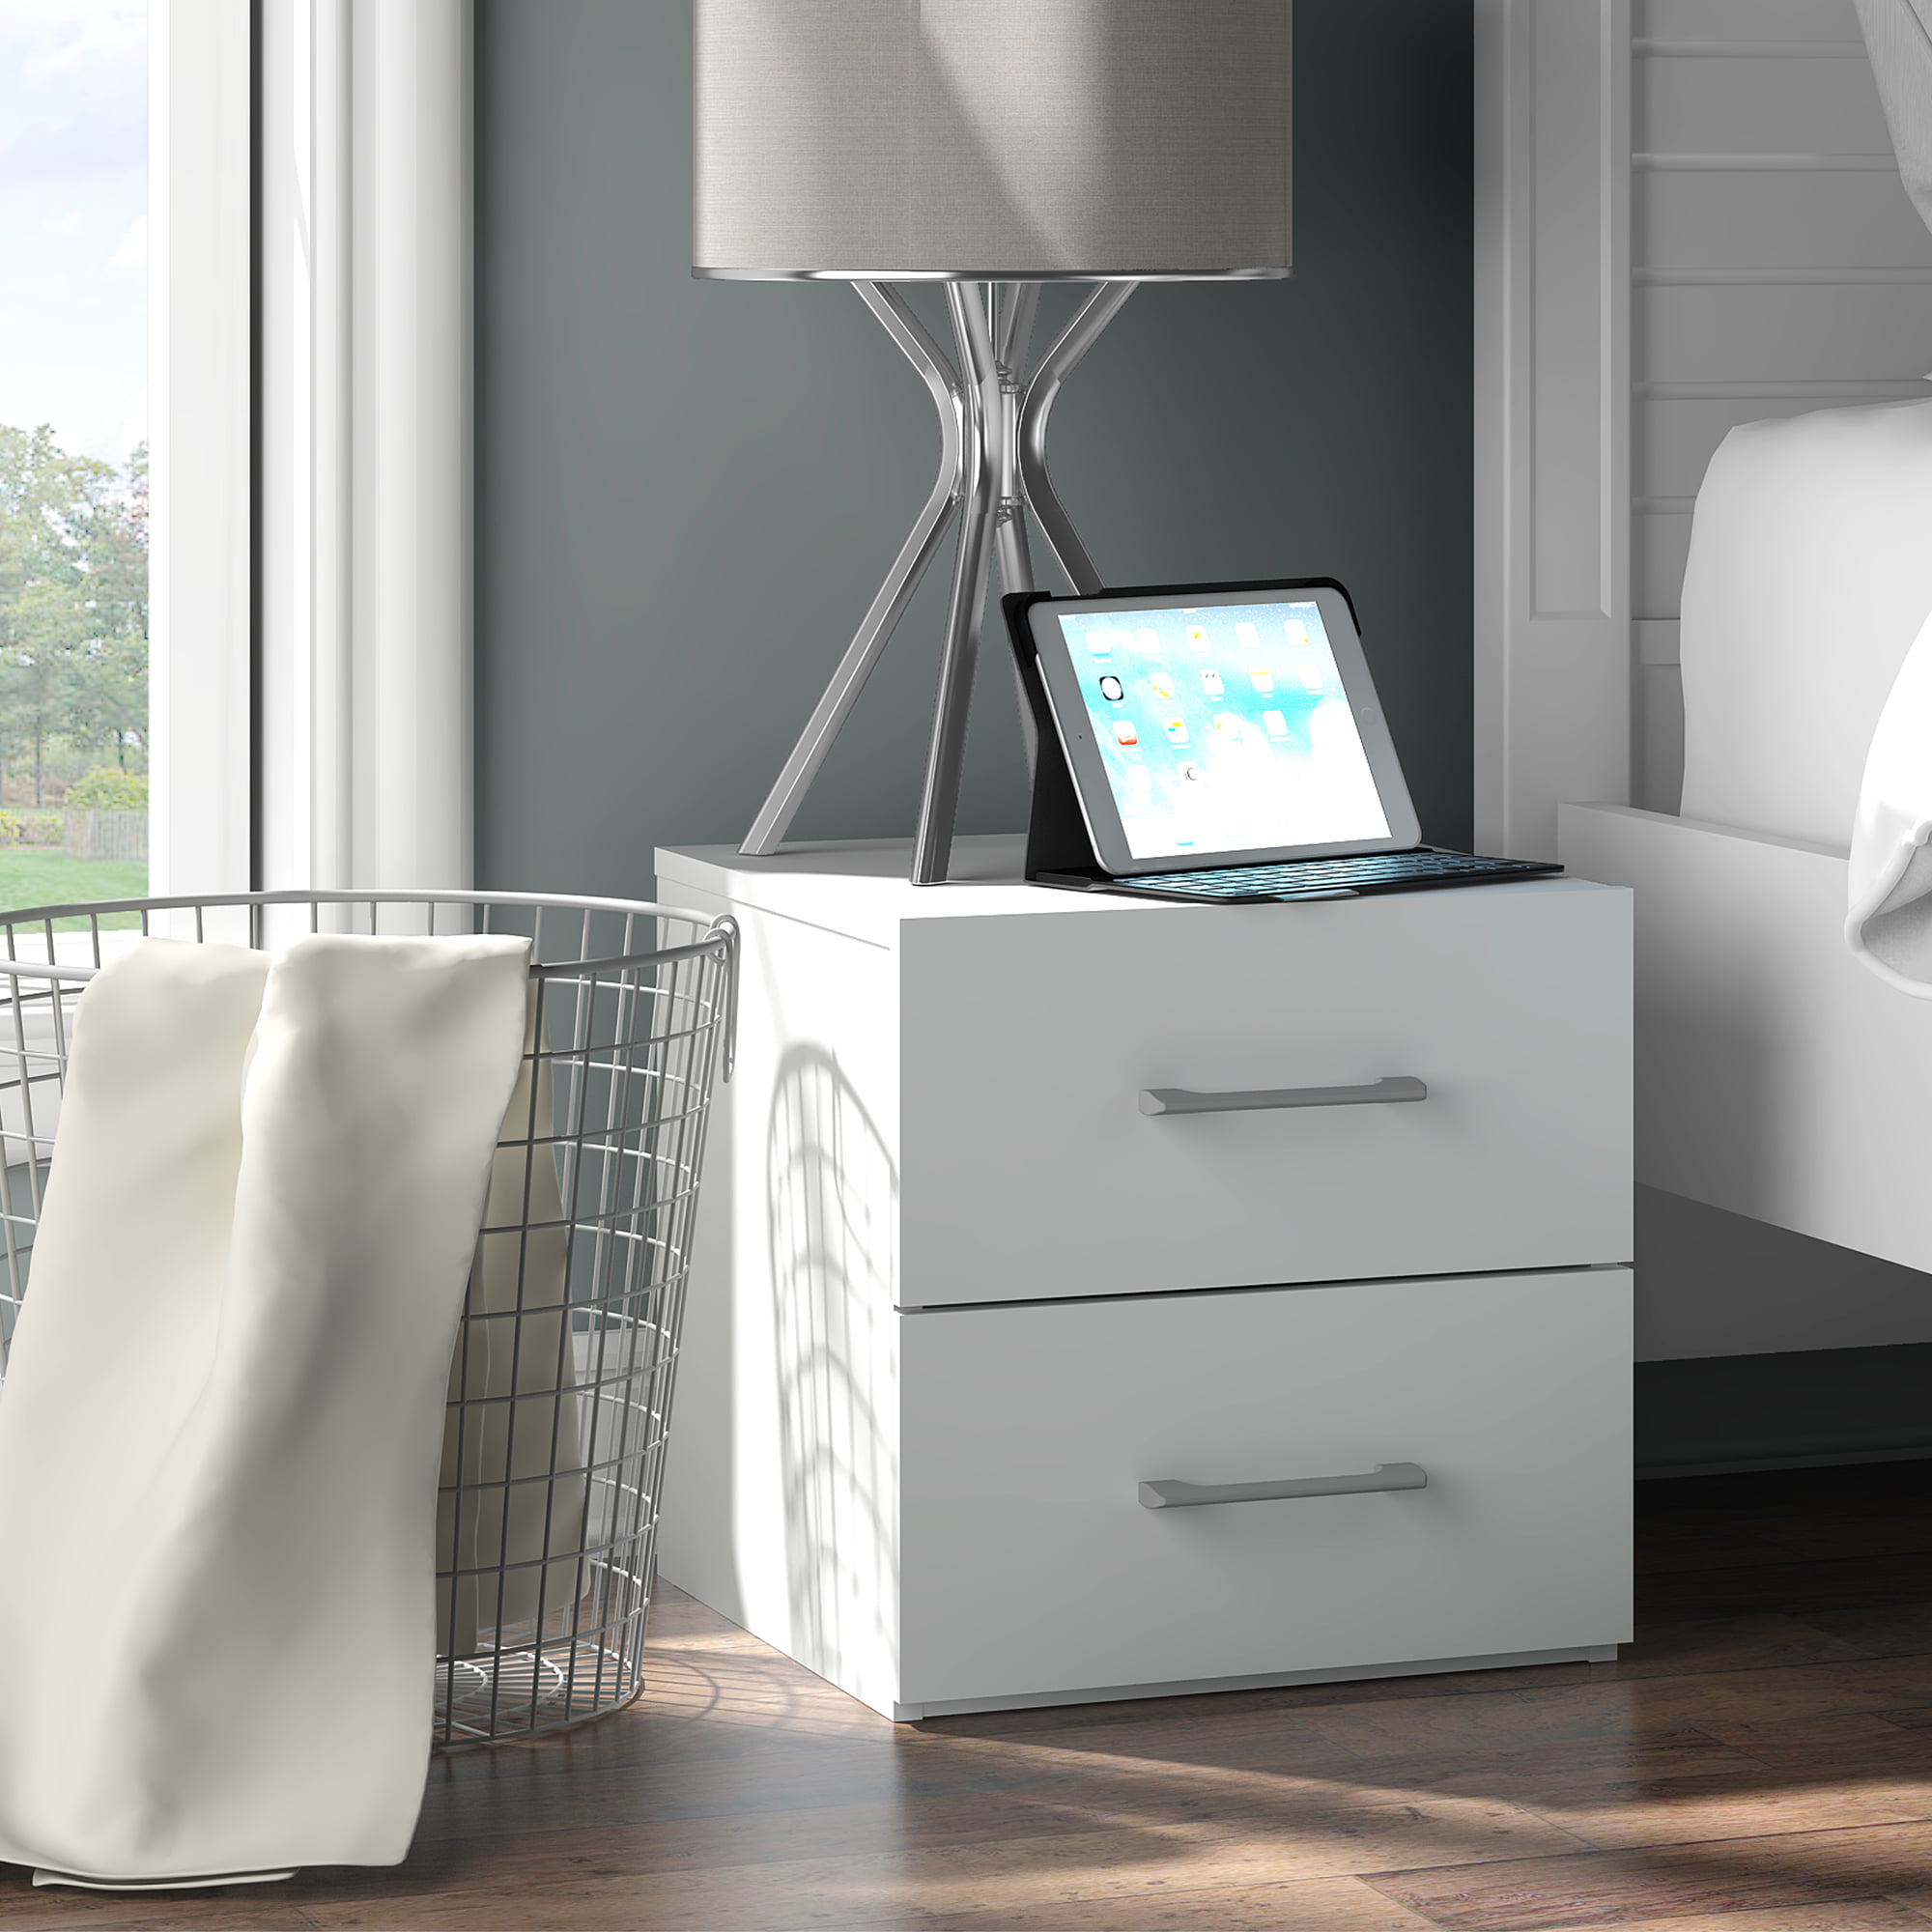 Hillsdale Living Essentials Lundy Low Profile Nightstand with USB Port (White or Black) $63 + Free Shipping